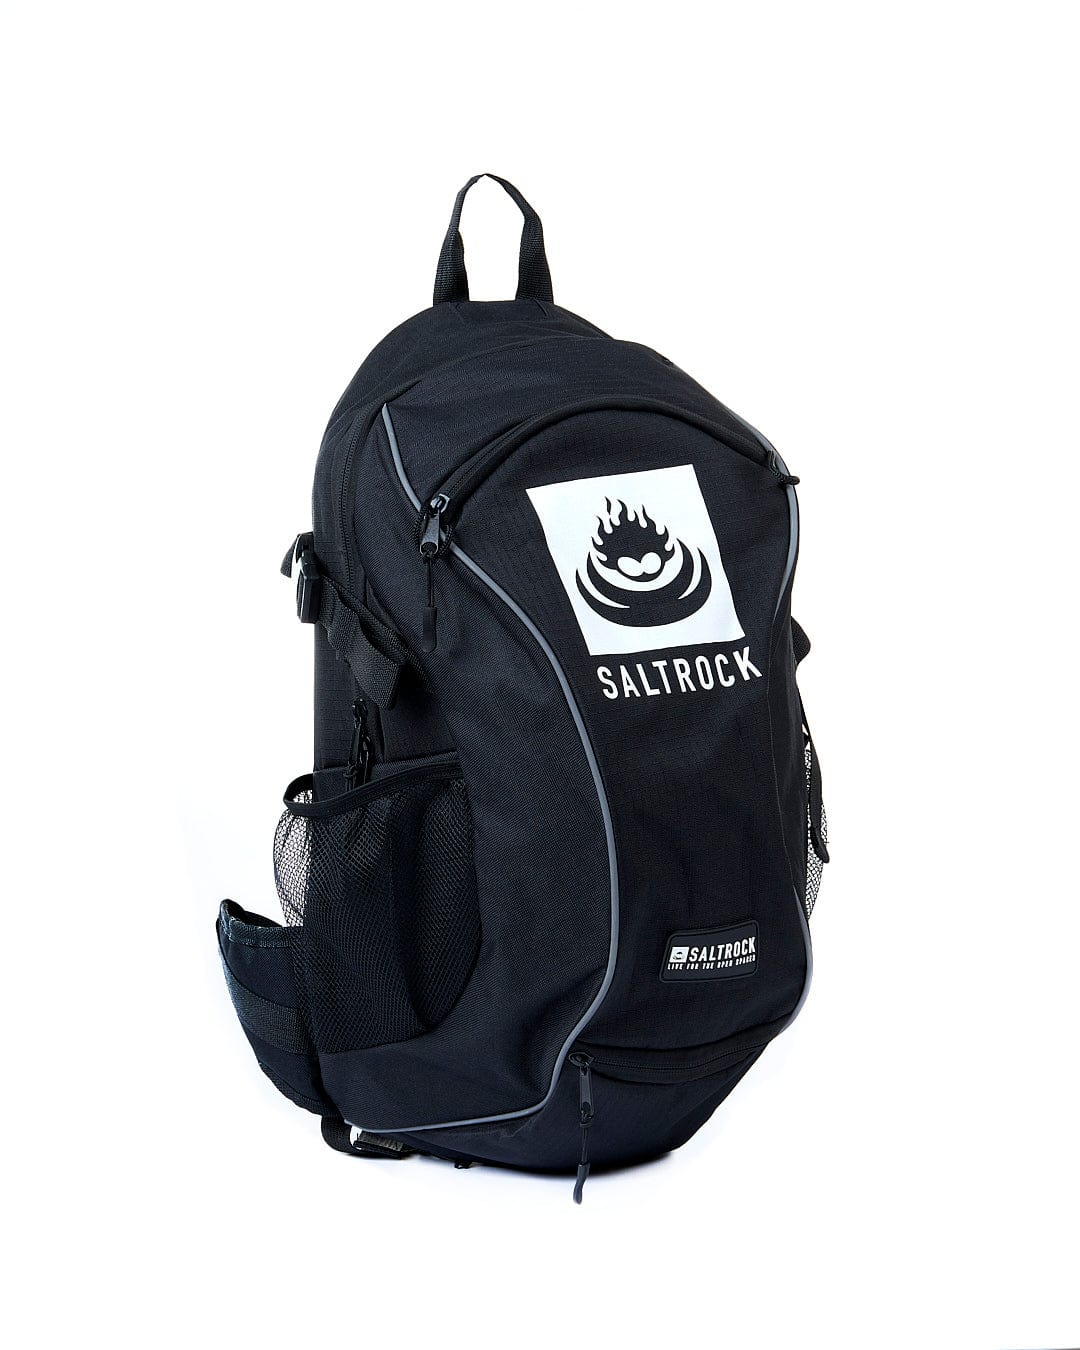 A Saltrock Cyclone - Urban Backpack - Black with a logo on it.